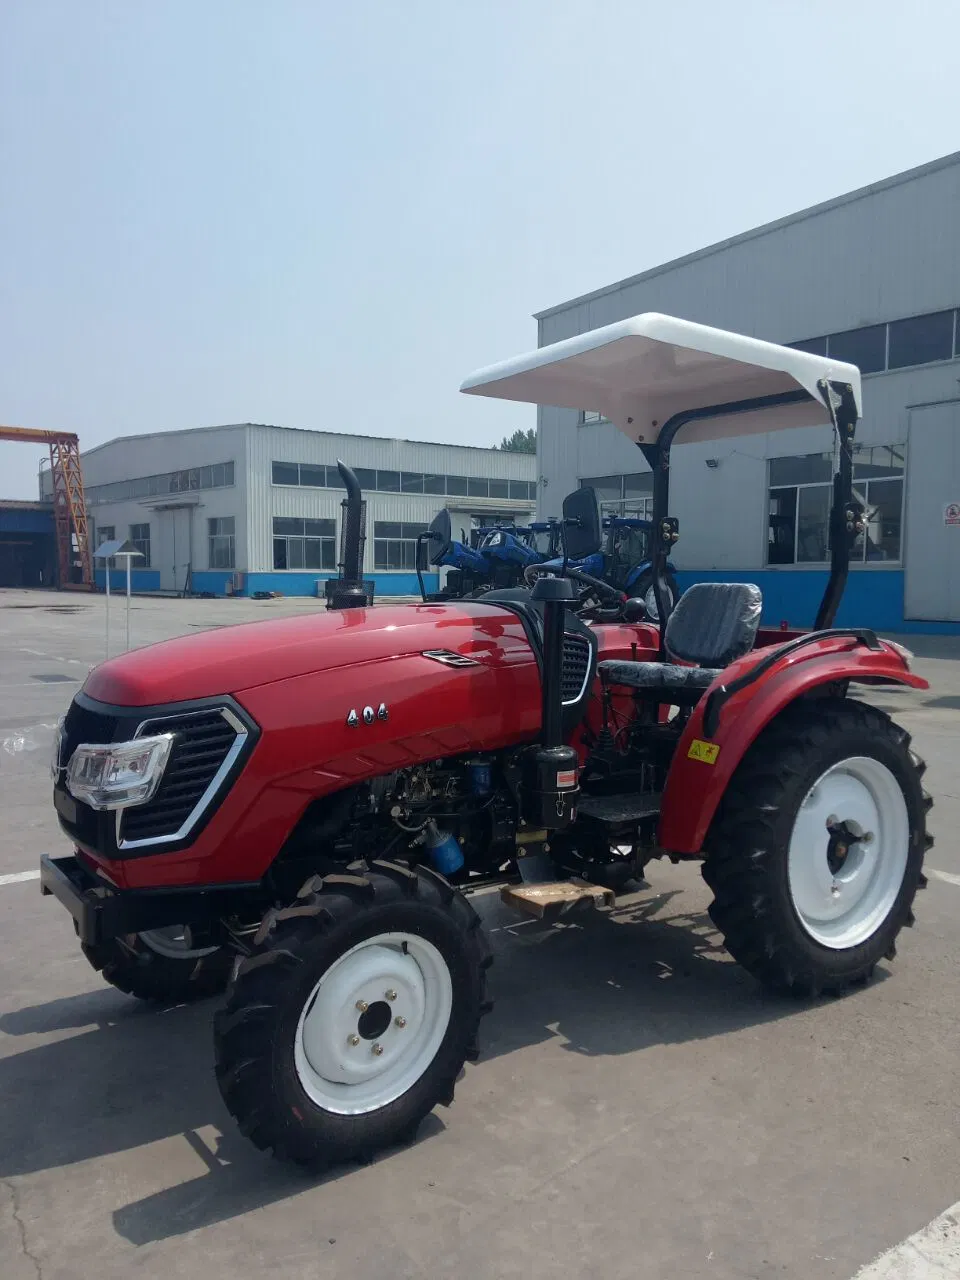 Factory Supply Chinese 40HP 4WD Farm/Mini/Diesel/Small Garden/Agricultural Tractor